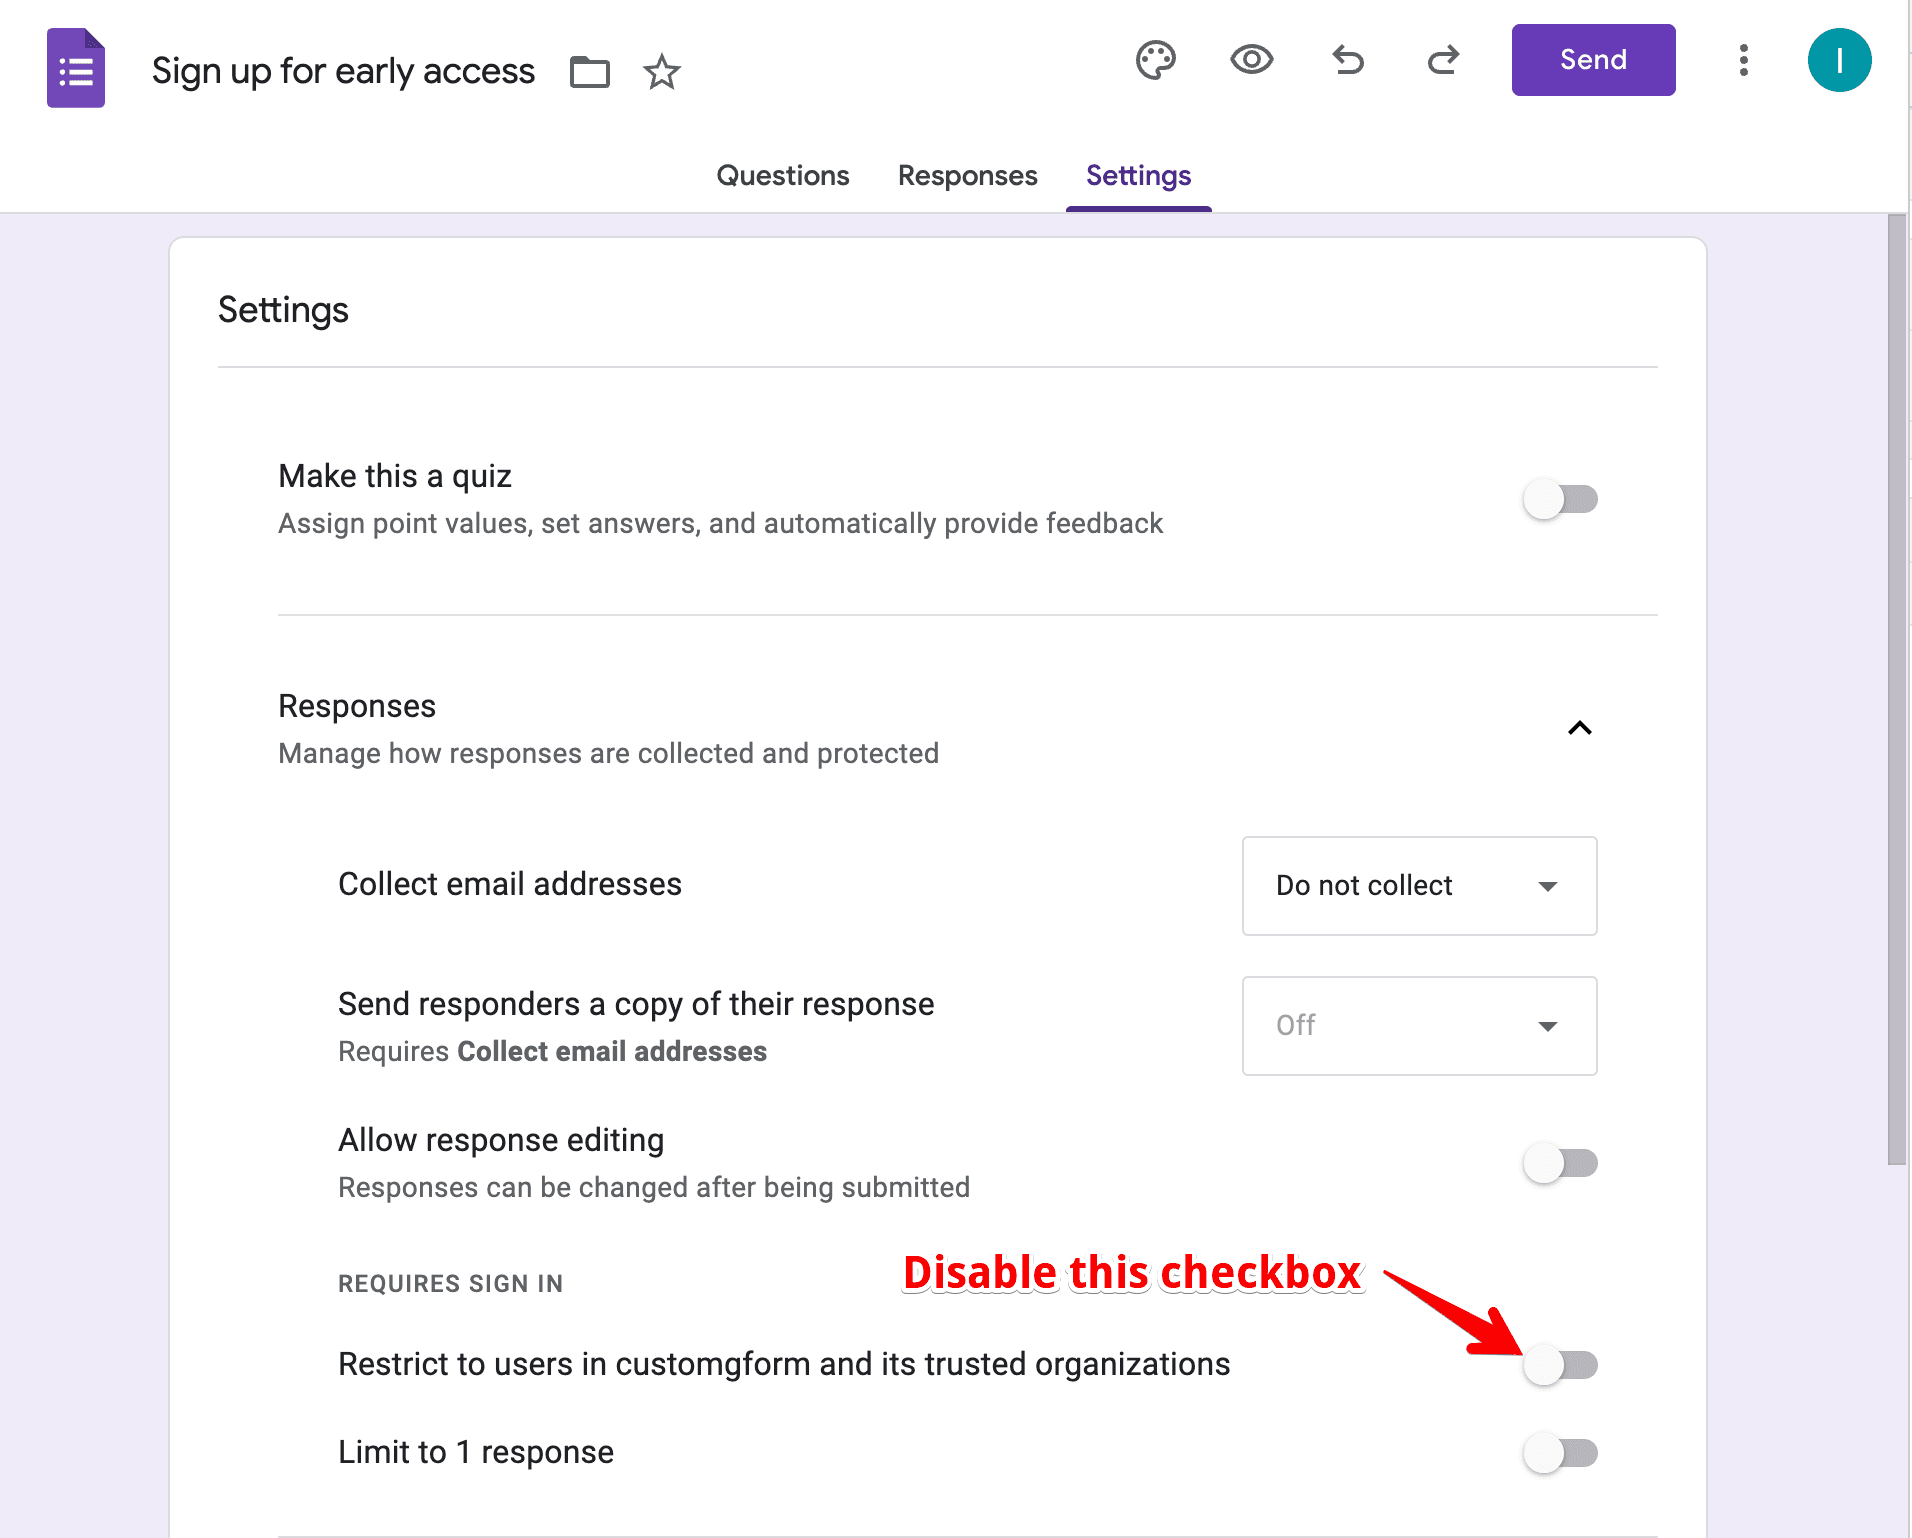 Disable Restrict to users checkbox